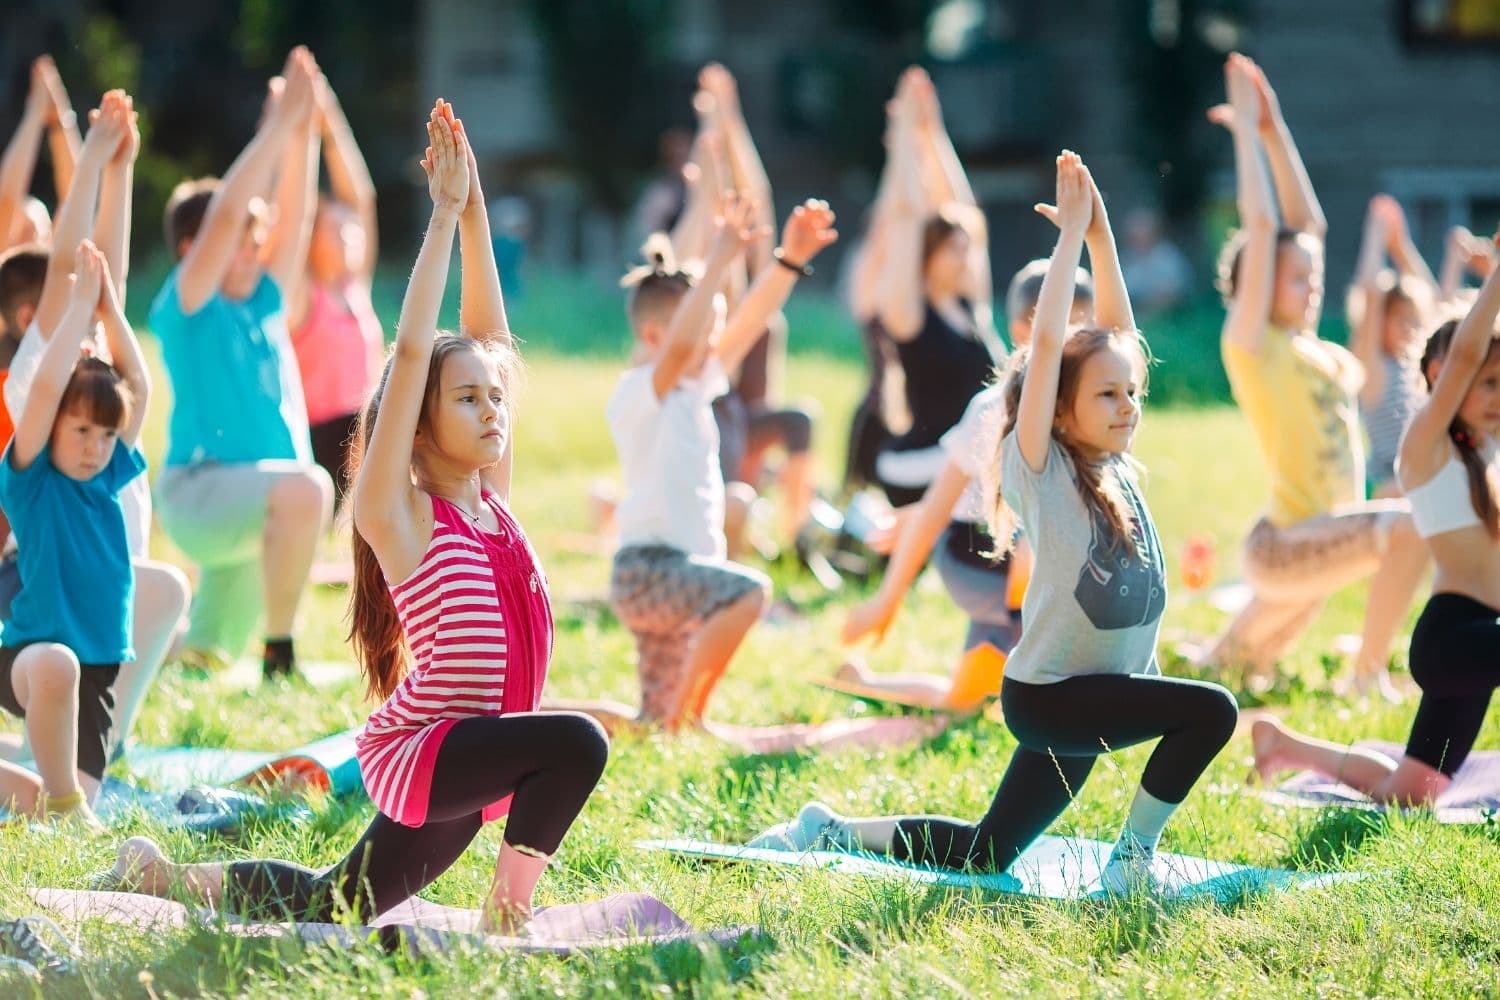 5 yoga poses for kids to perform in winter to stay warm and active |  HealthShots